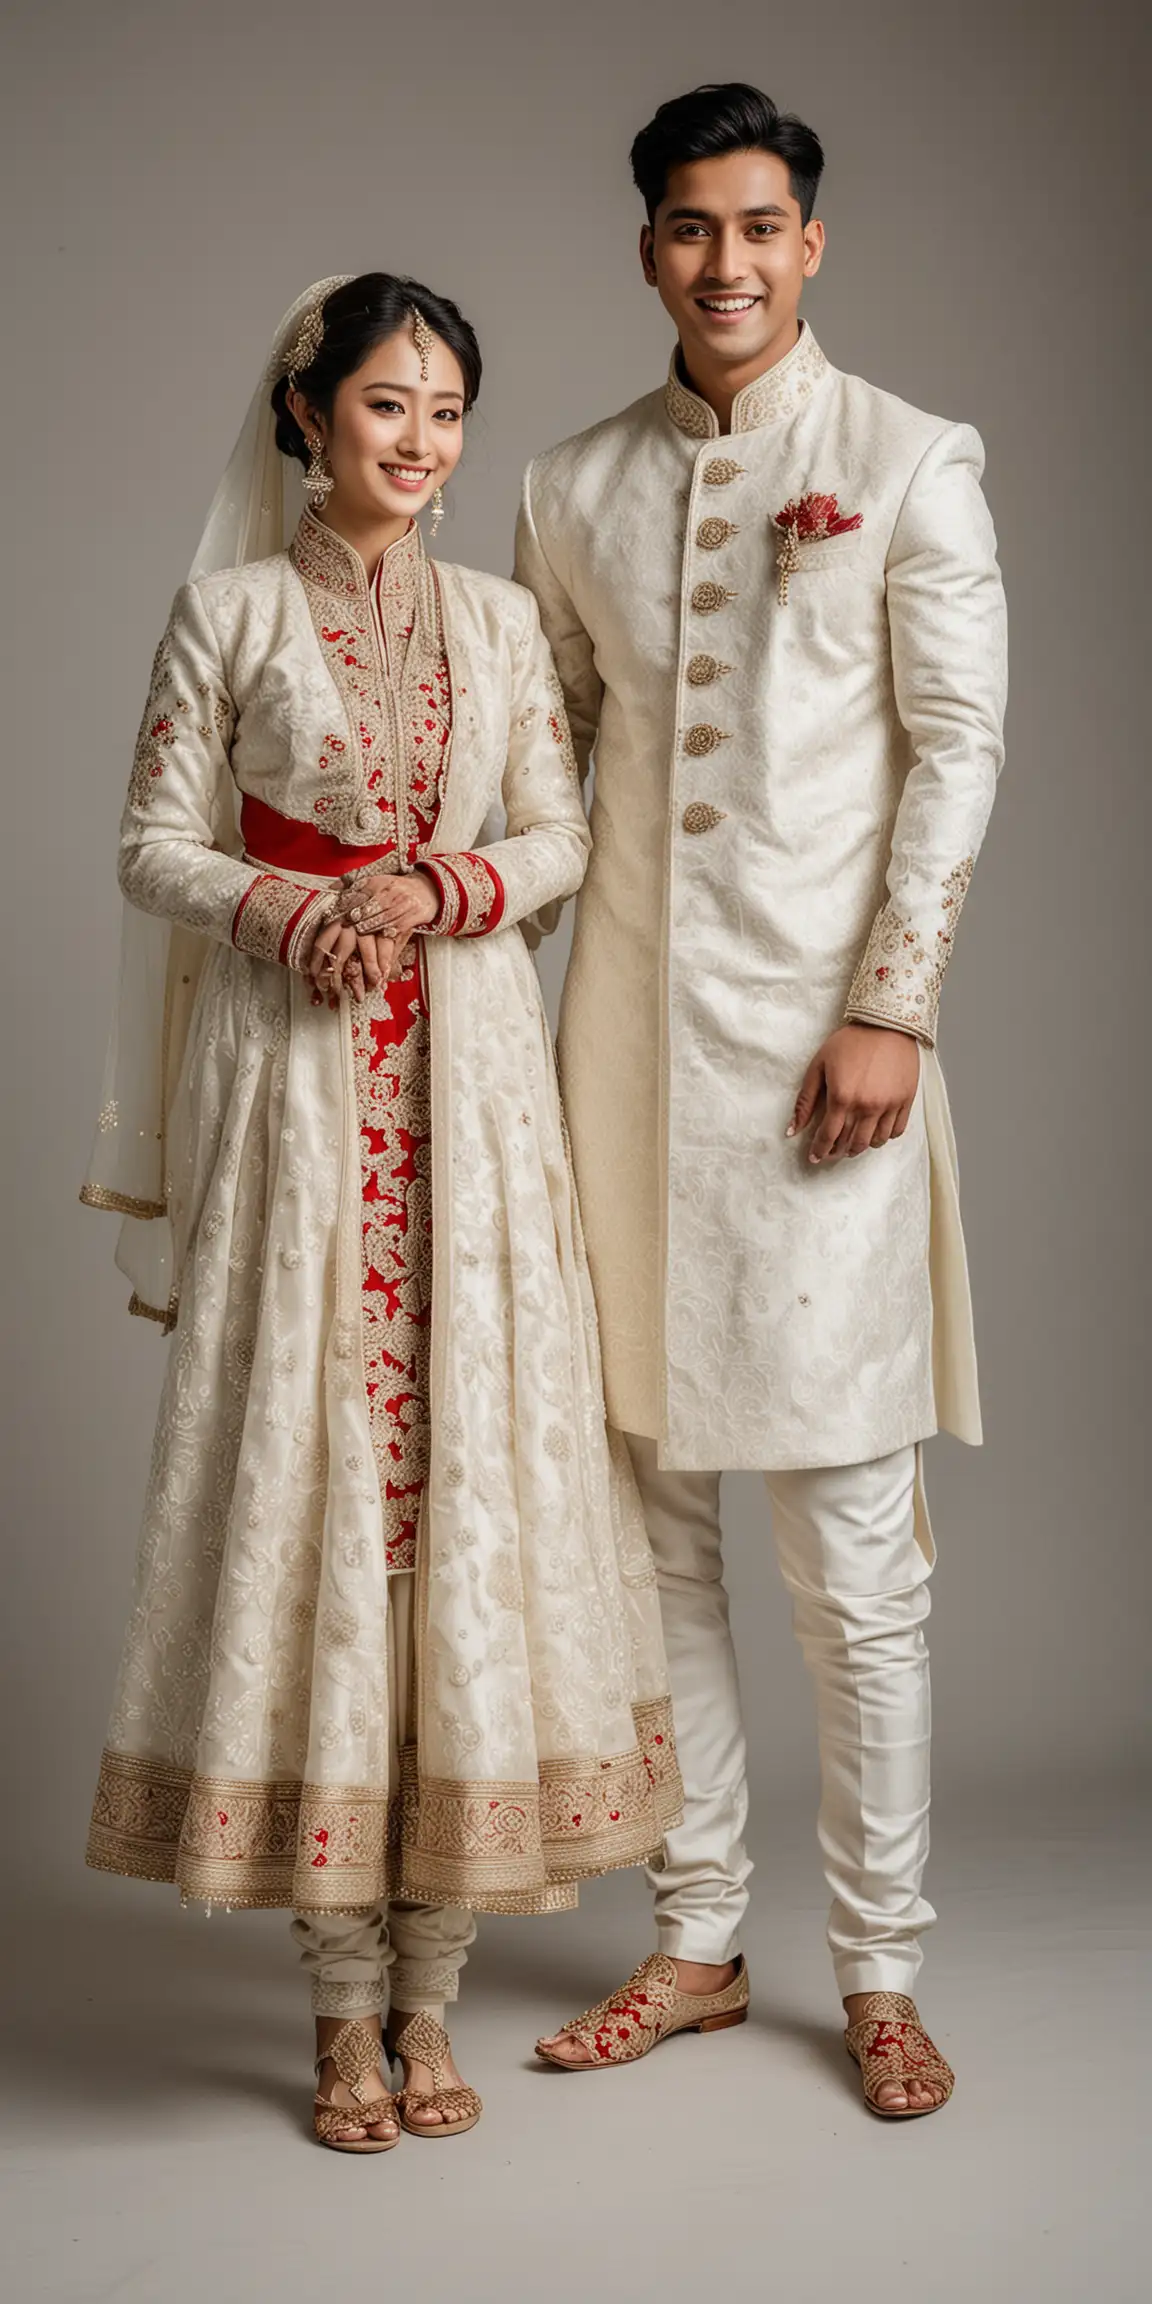  bride in white korean outfit, indian groom in wedding sherwani and shoes